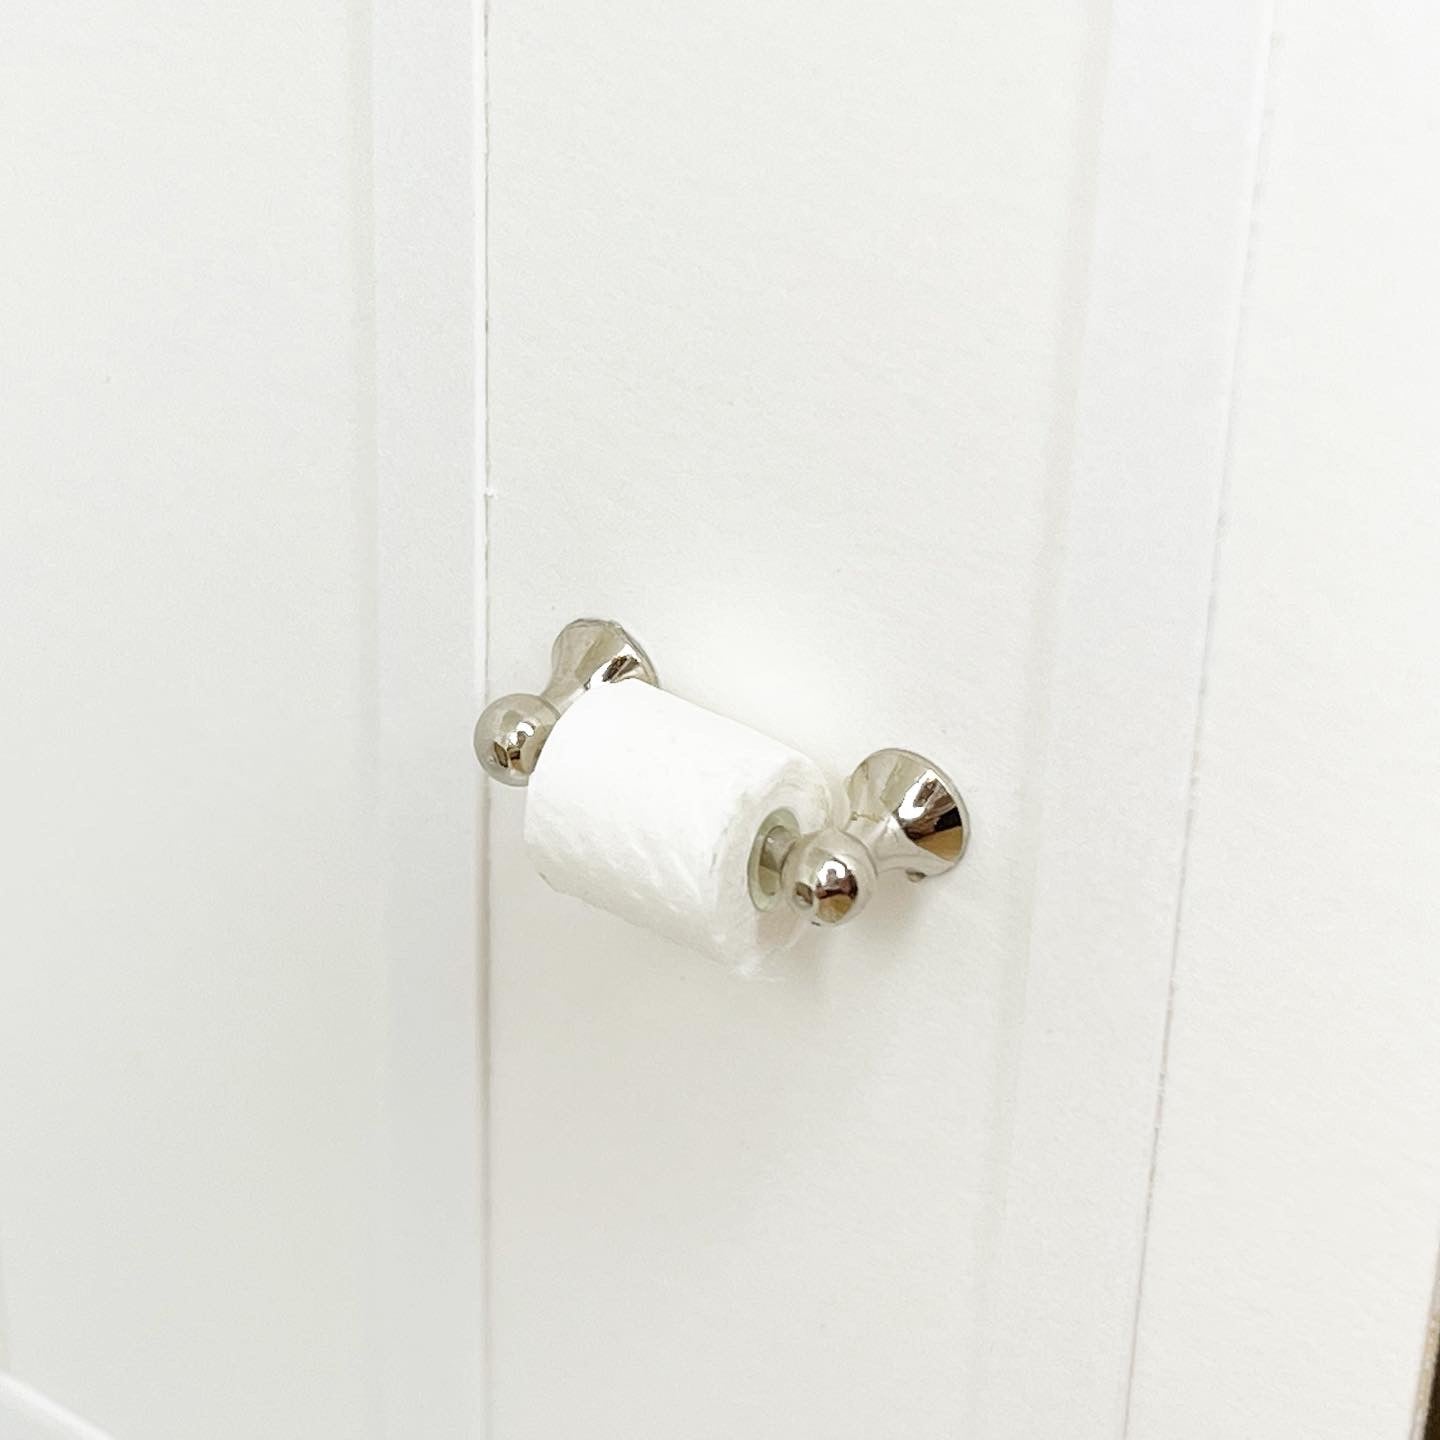 Toilet Paper and Holder